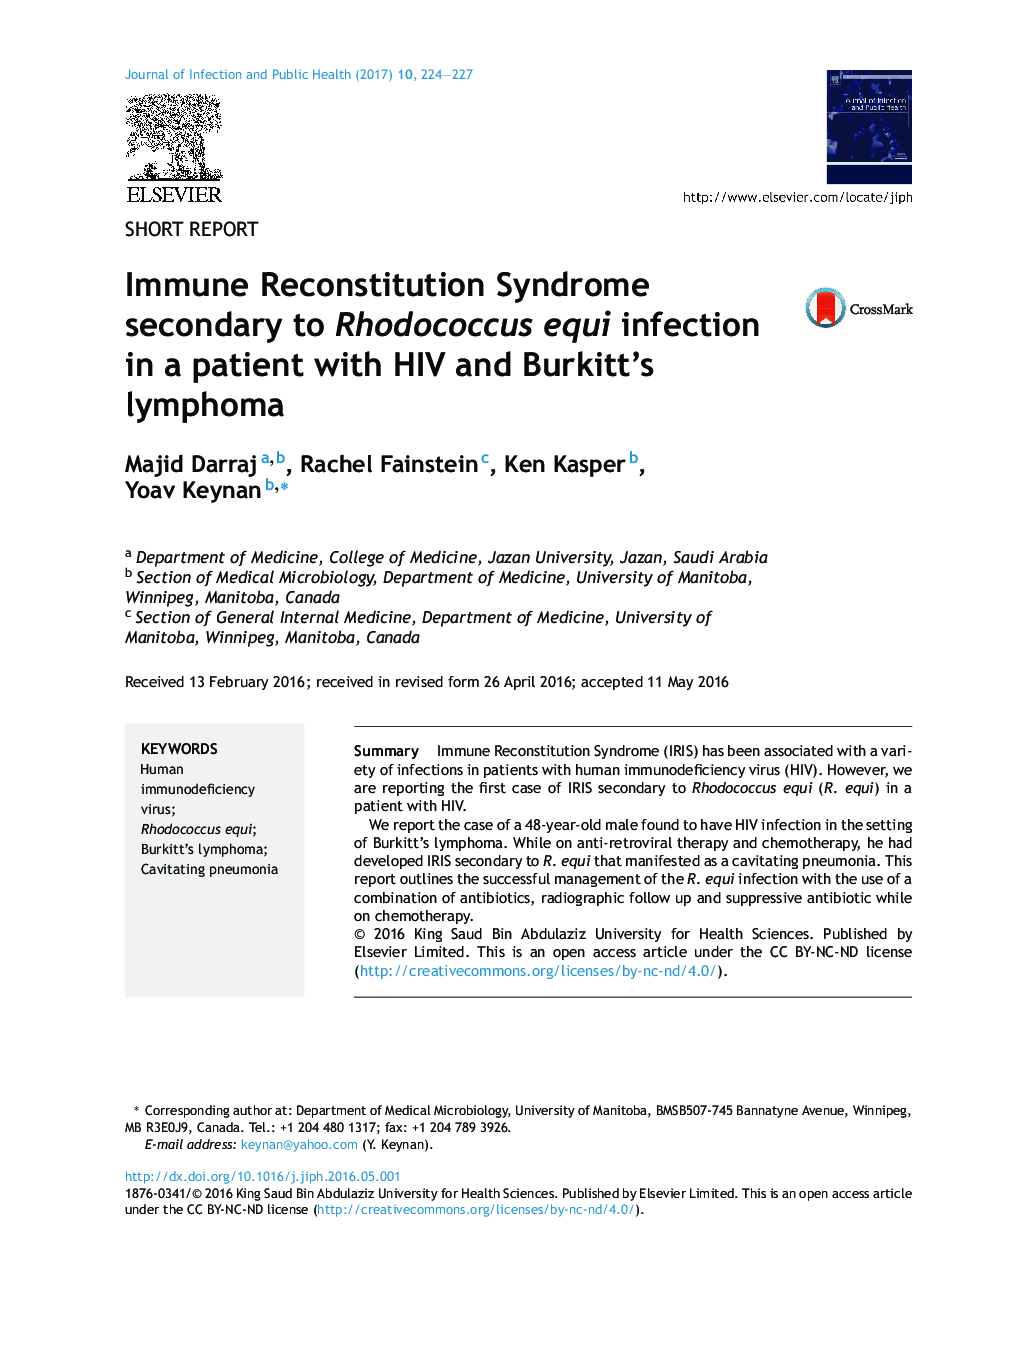 Immune Reconstitution Syndrome secondary to Rhodococcus equi infection in a patient with HIV and Burkitt's lymphoma